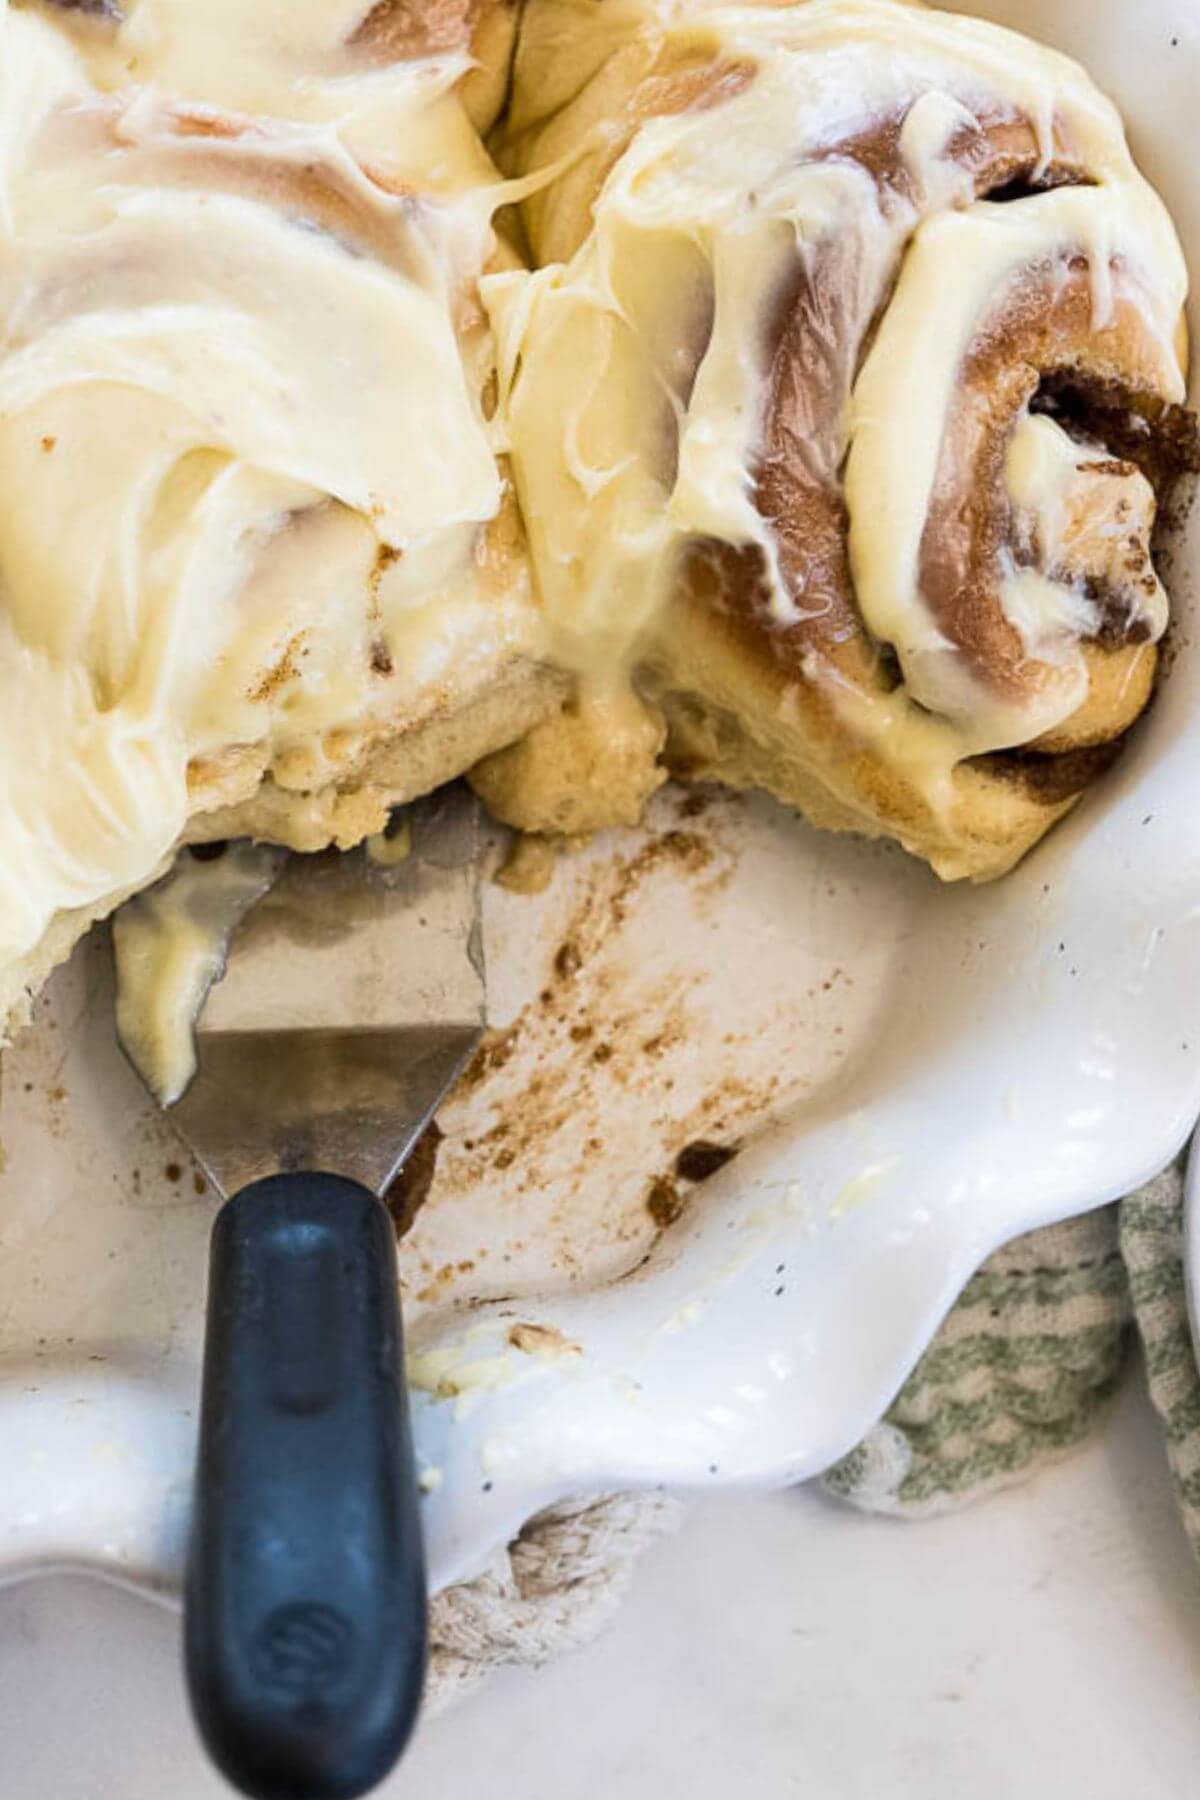 A metal spatula hangs out from under the bottom of cinnamon buns in a white decorative bowl.